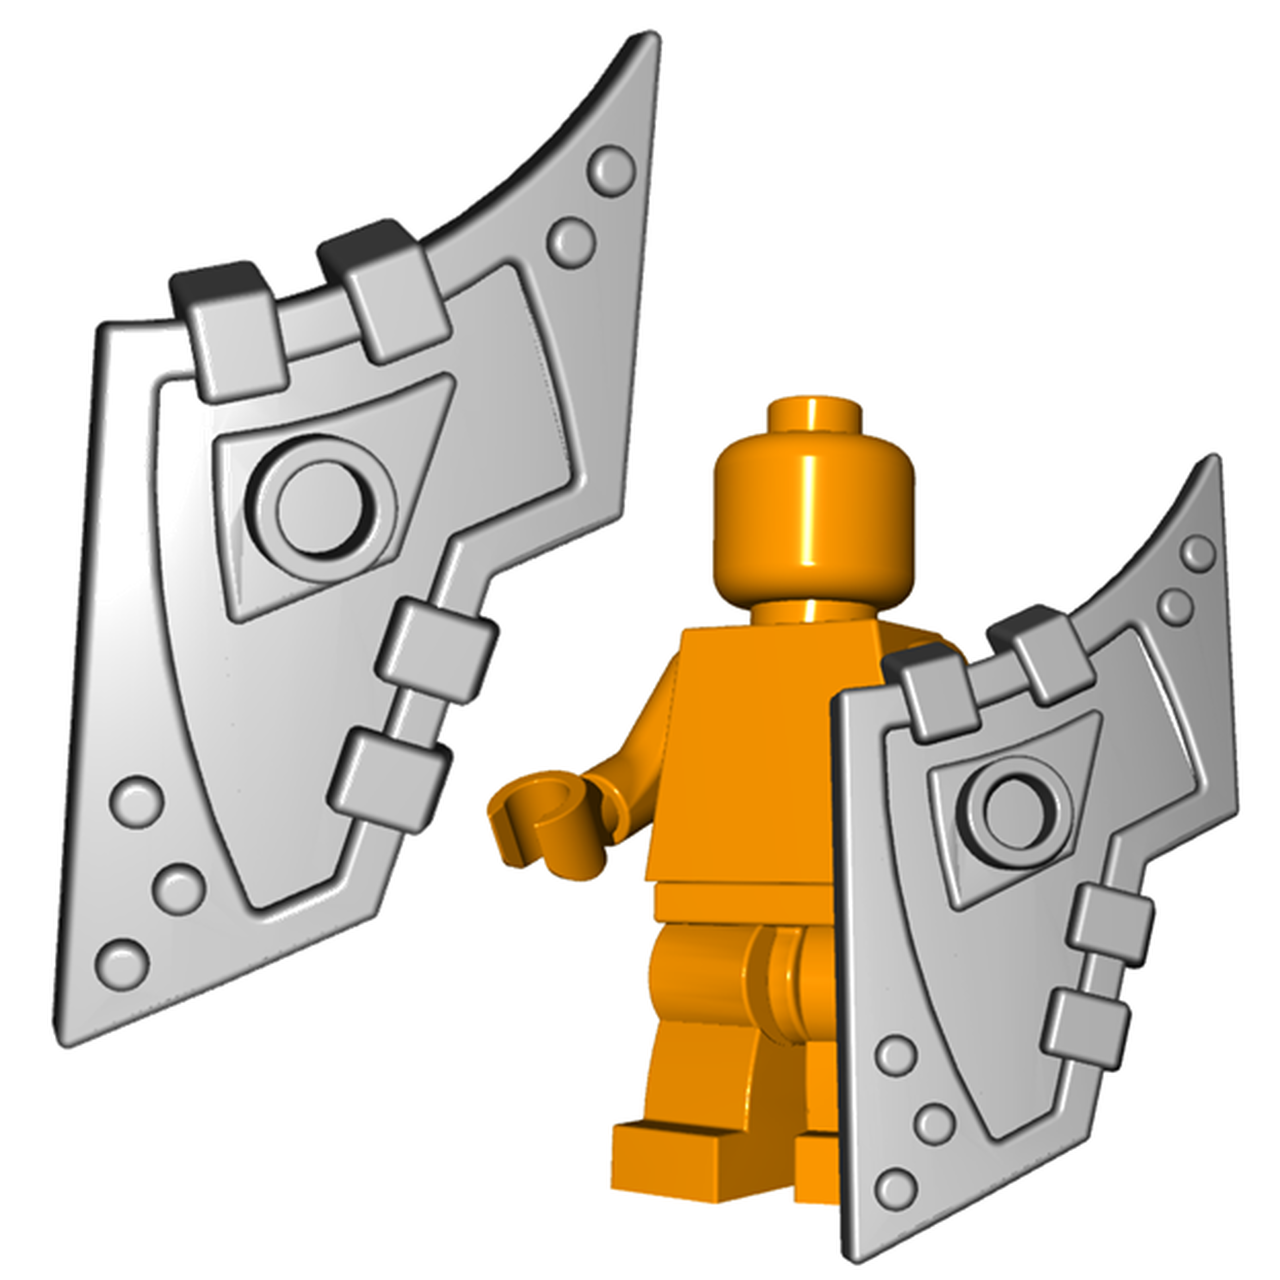 Orc Tower Shield for LEGO minifigures